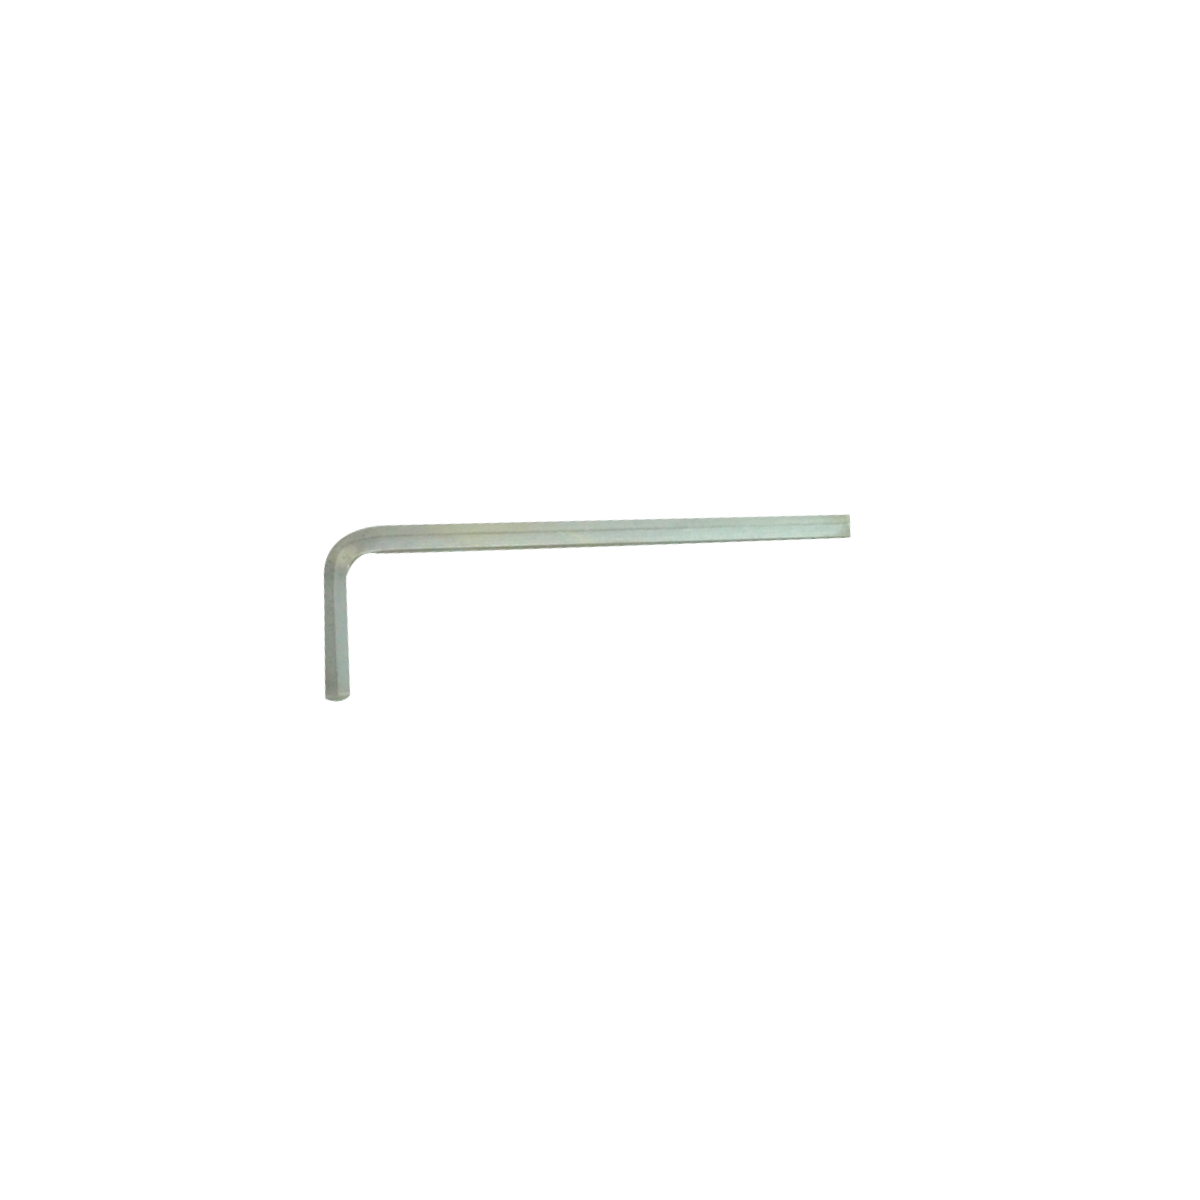 Allen Key 3.0mm (to use with Cat no 205.155 & 205.156)